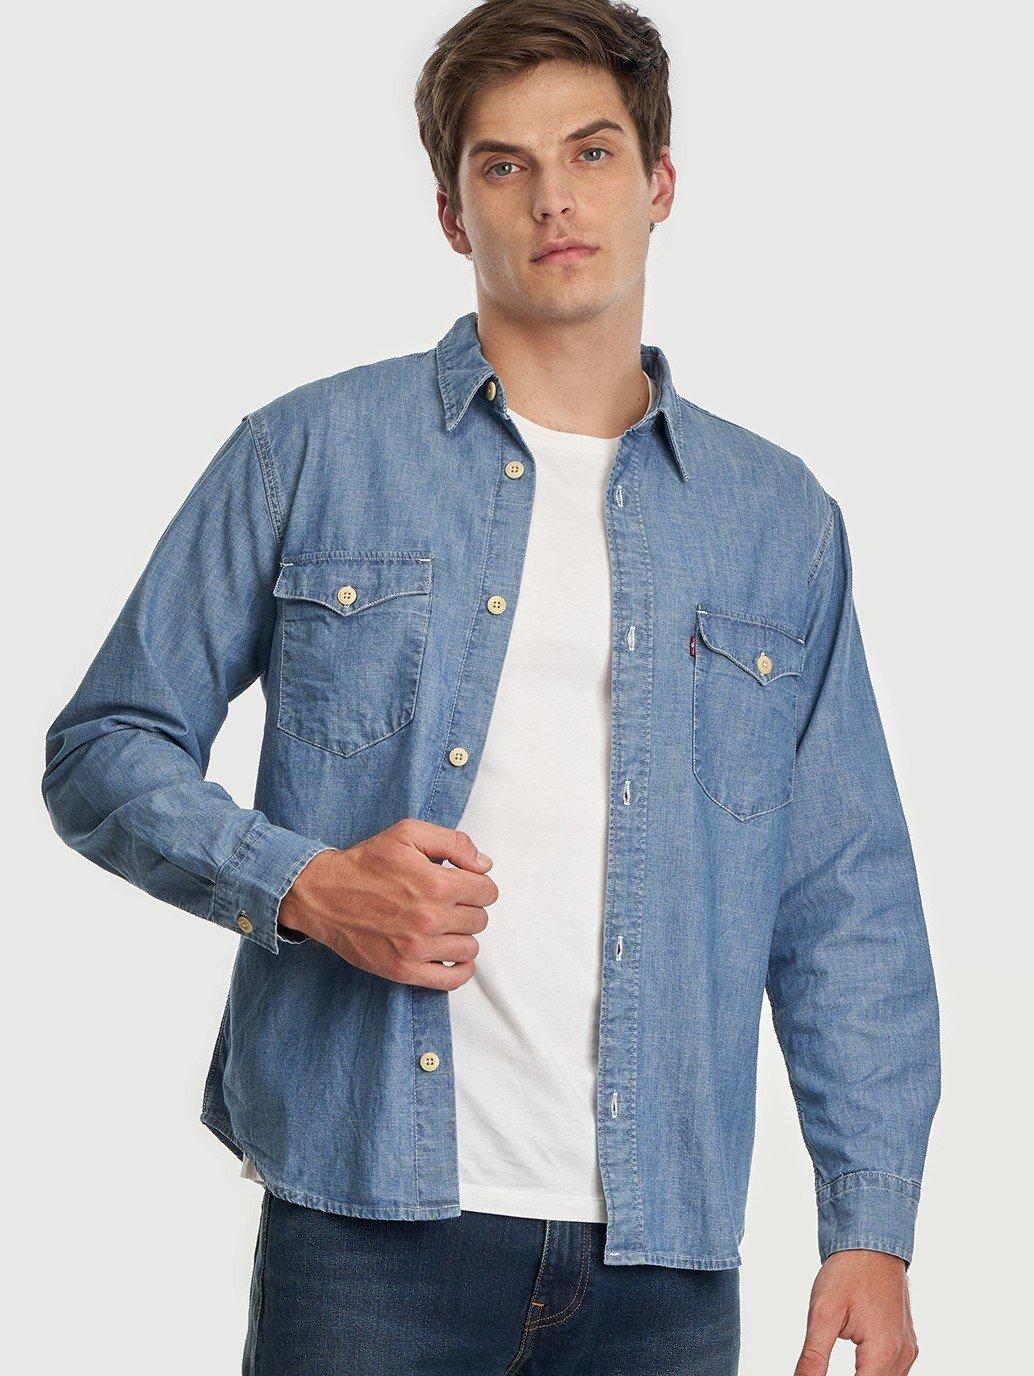 Buy Levi's® Men's Relaxed Fit Western Shirt | Levi's® Official Online Store  PH